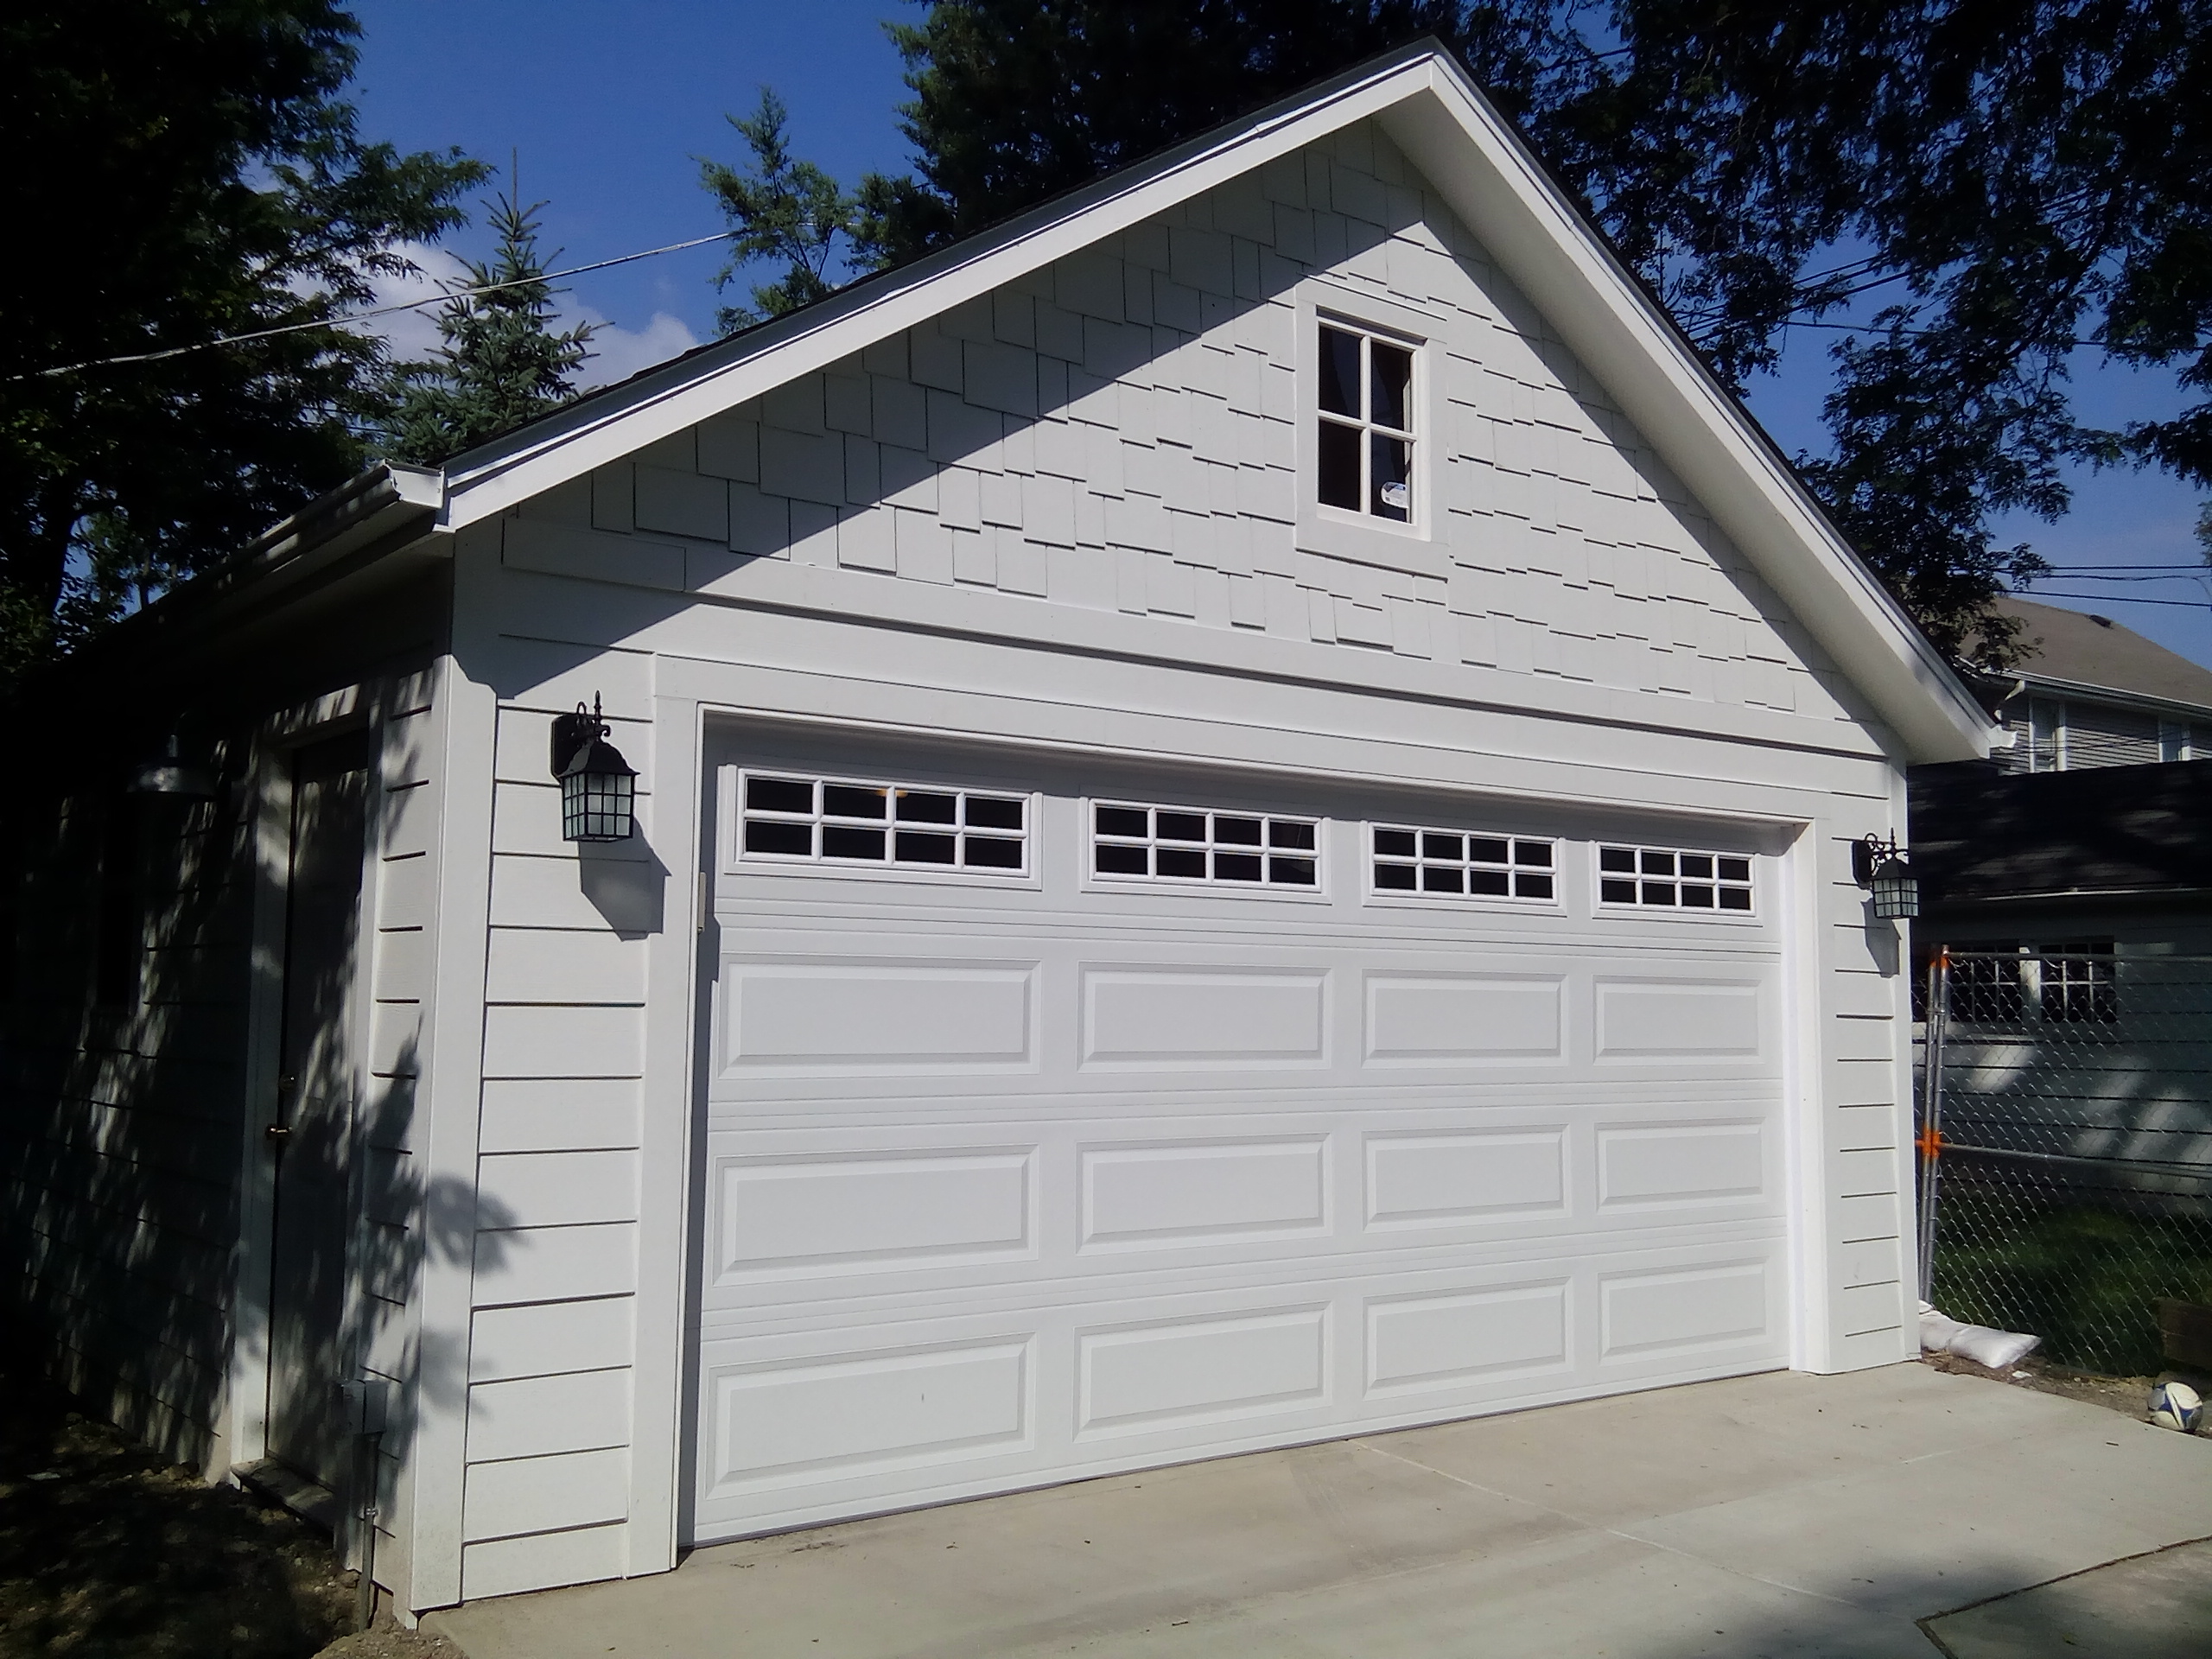 RYAN PARKS OAK PARK CUSTOM CEMENT BOARD SIDING DOORS TRIM GABLE ENDS WITH ATTIC STORAGE AND STAIRS  (2)